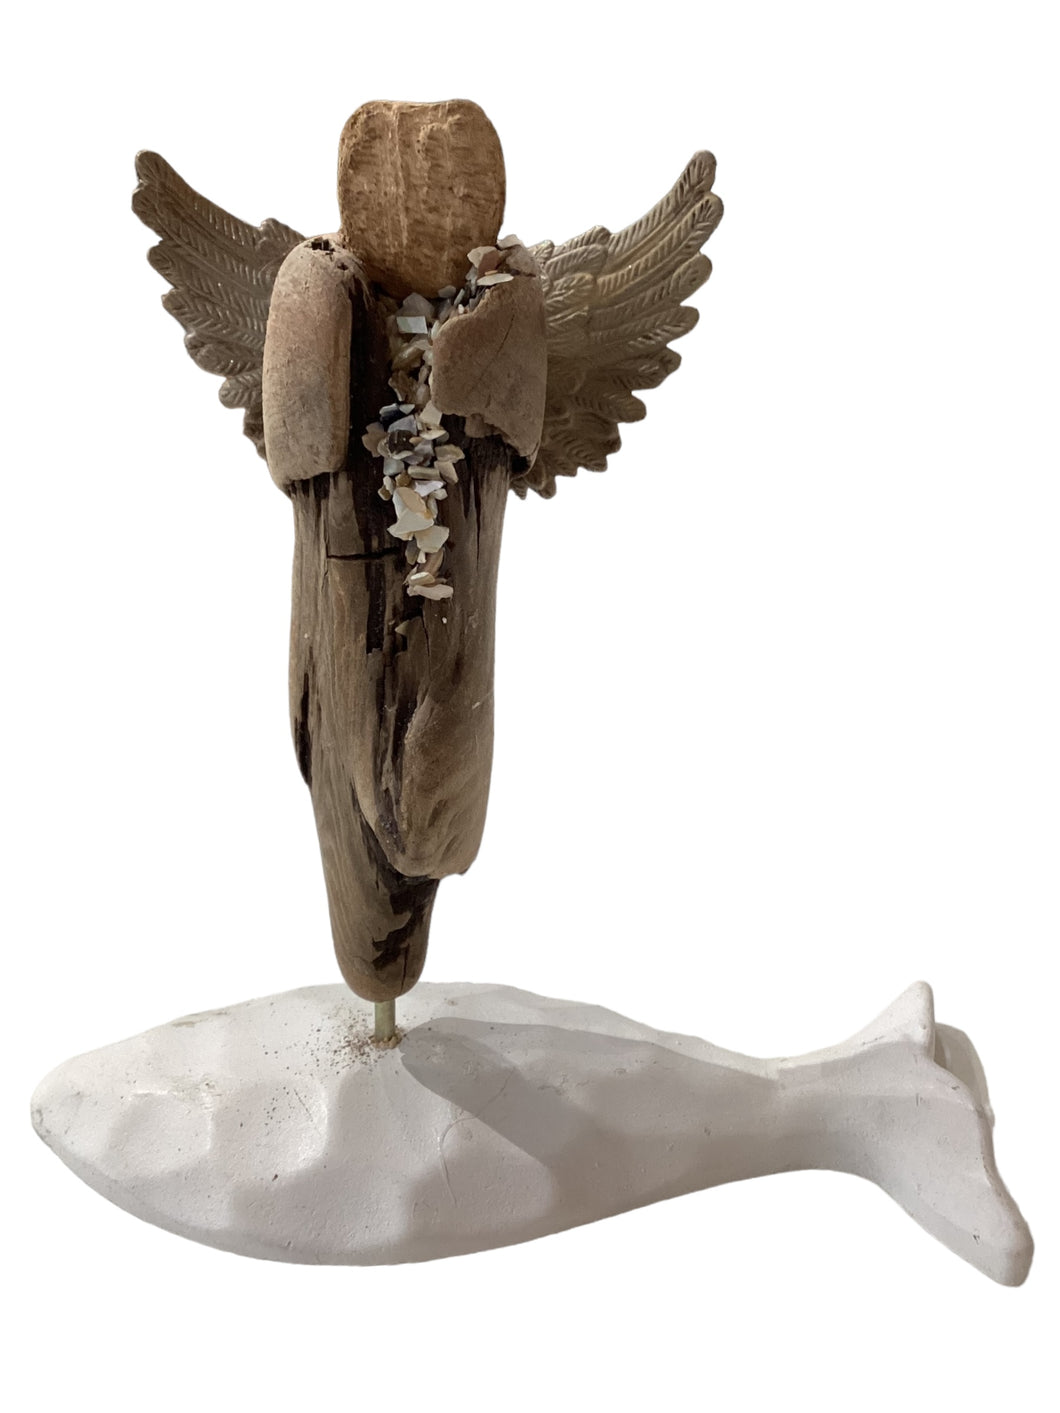 Driftwood Angel Sculpture on White Fish Stand